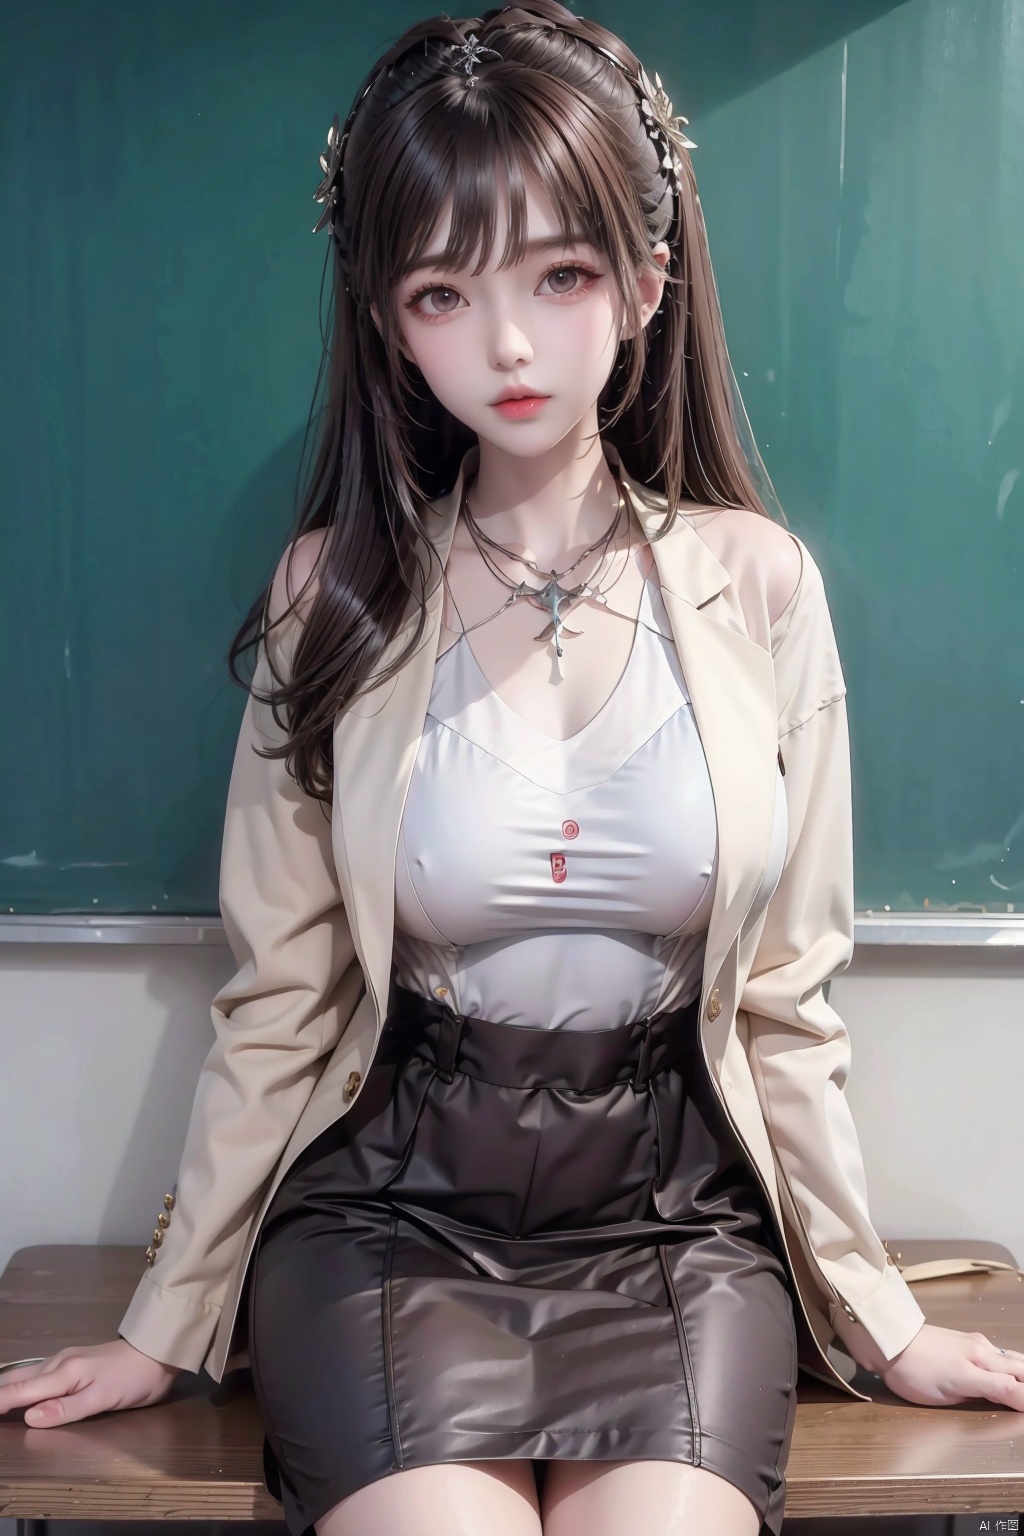  1girl, breasts, brown_eyes, brown_hair, chalkboard, classroom, cowboy_shot, desk, formal, glasses, hair_ornament, indoors, jacket, jewelry, looking_at_viewer, miniskirt, necklace, on_desk, pencil_skirt, school_desk, sitting_on_desk, skirt, solo, standing, suit, yeqinxian, yunxi